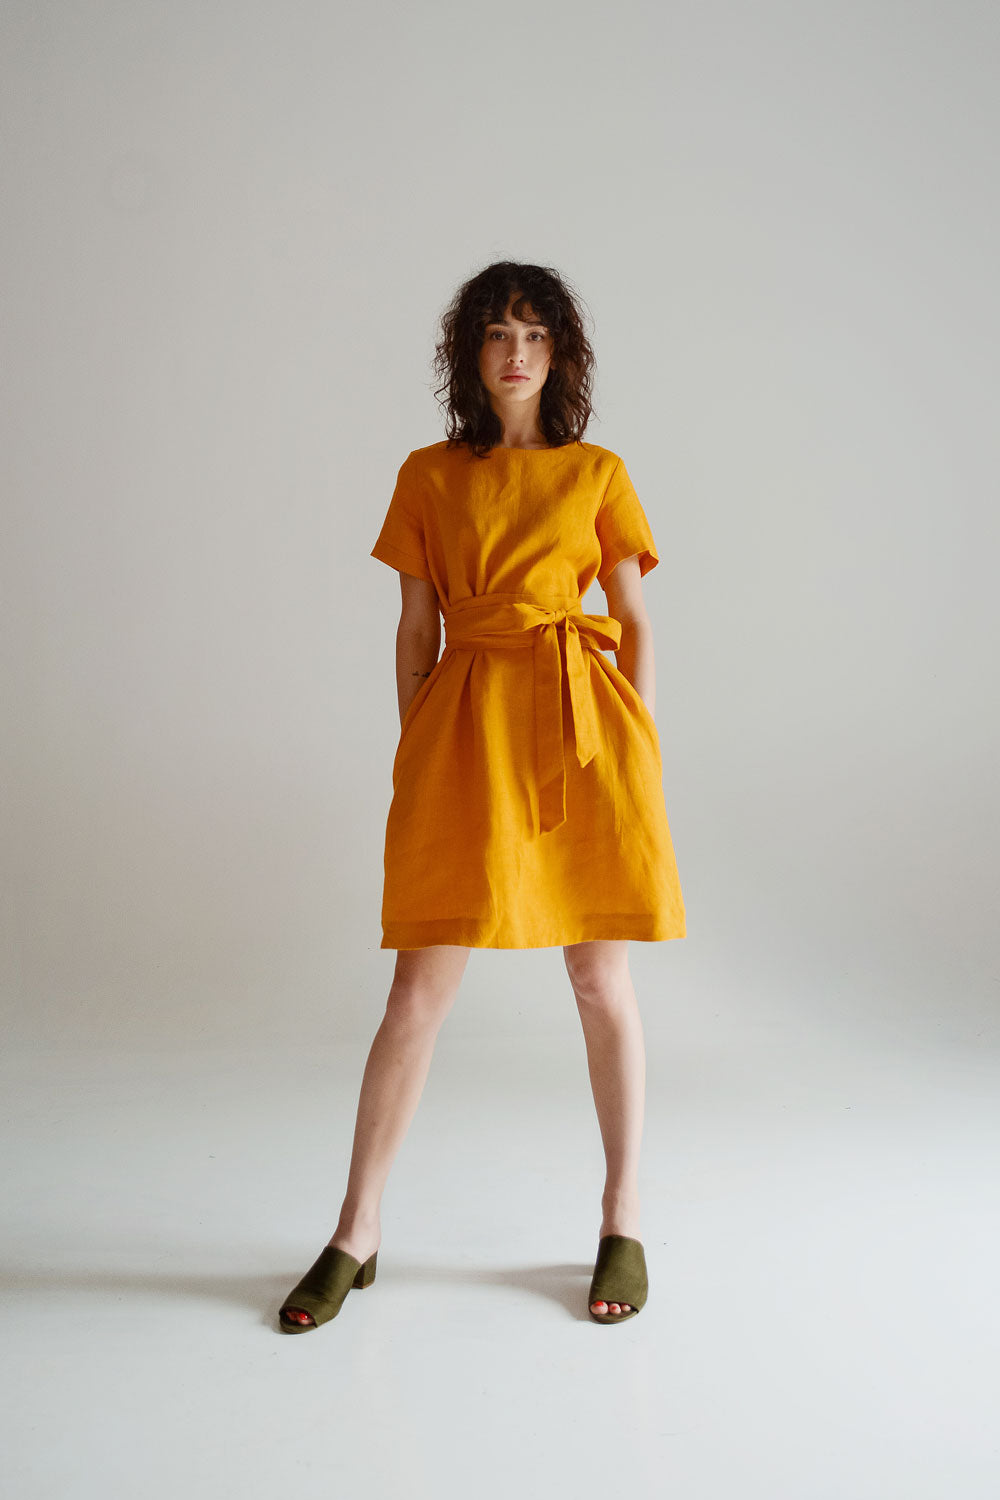 a woman in a yellow dress poses for a picture